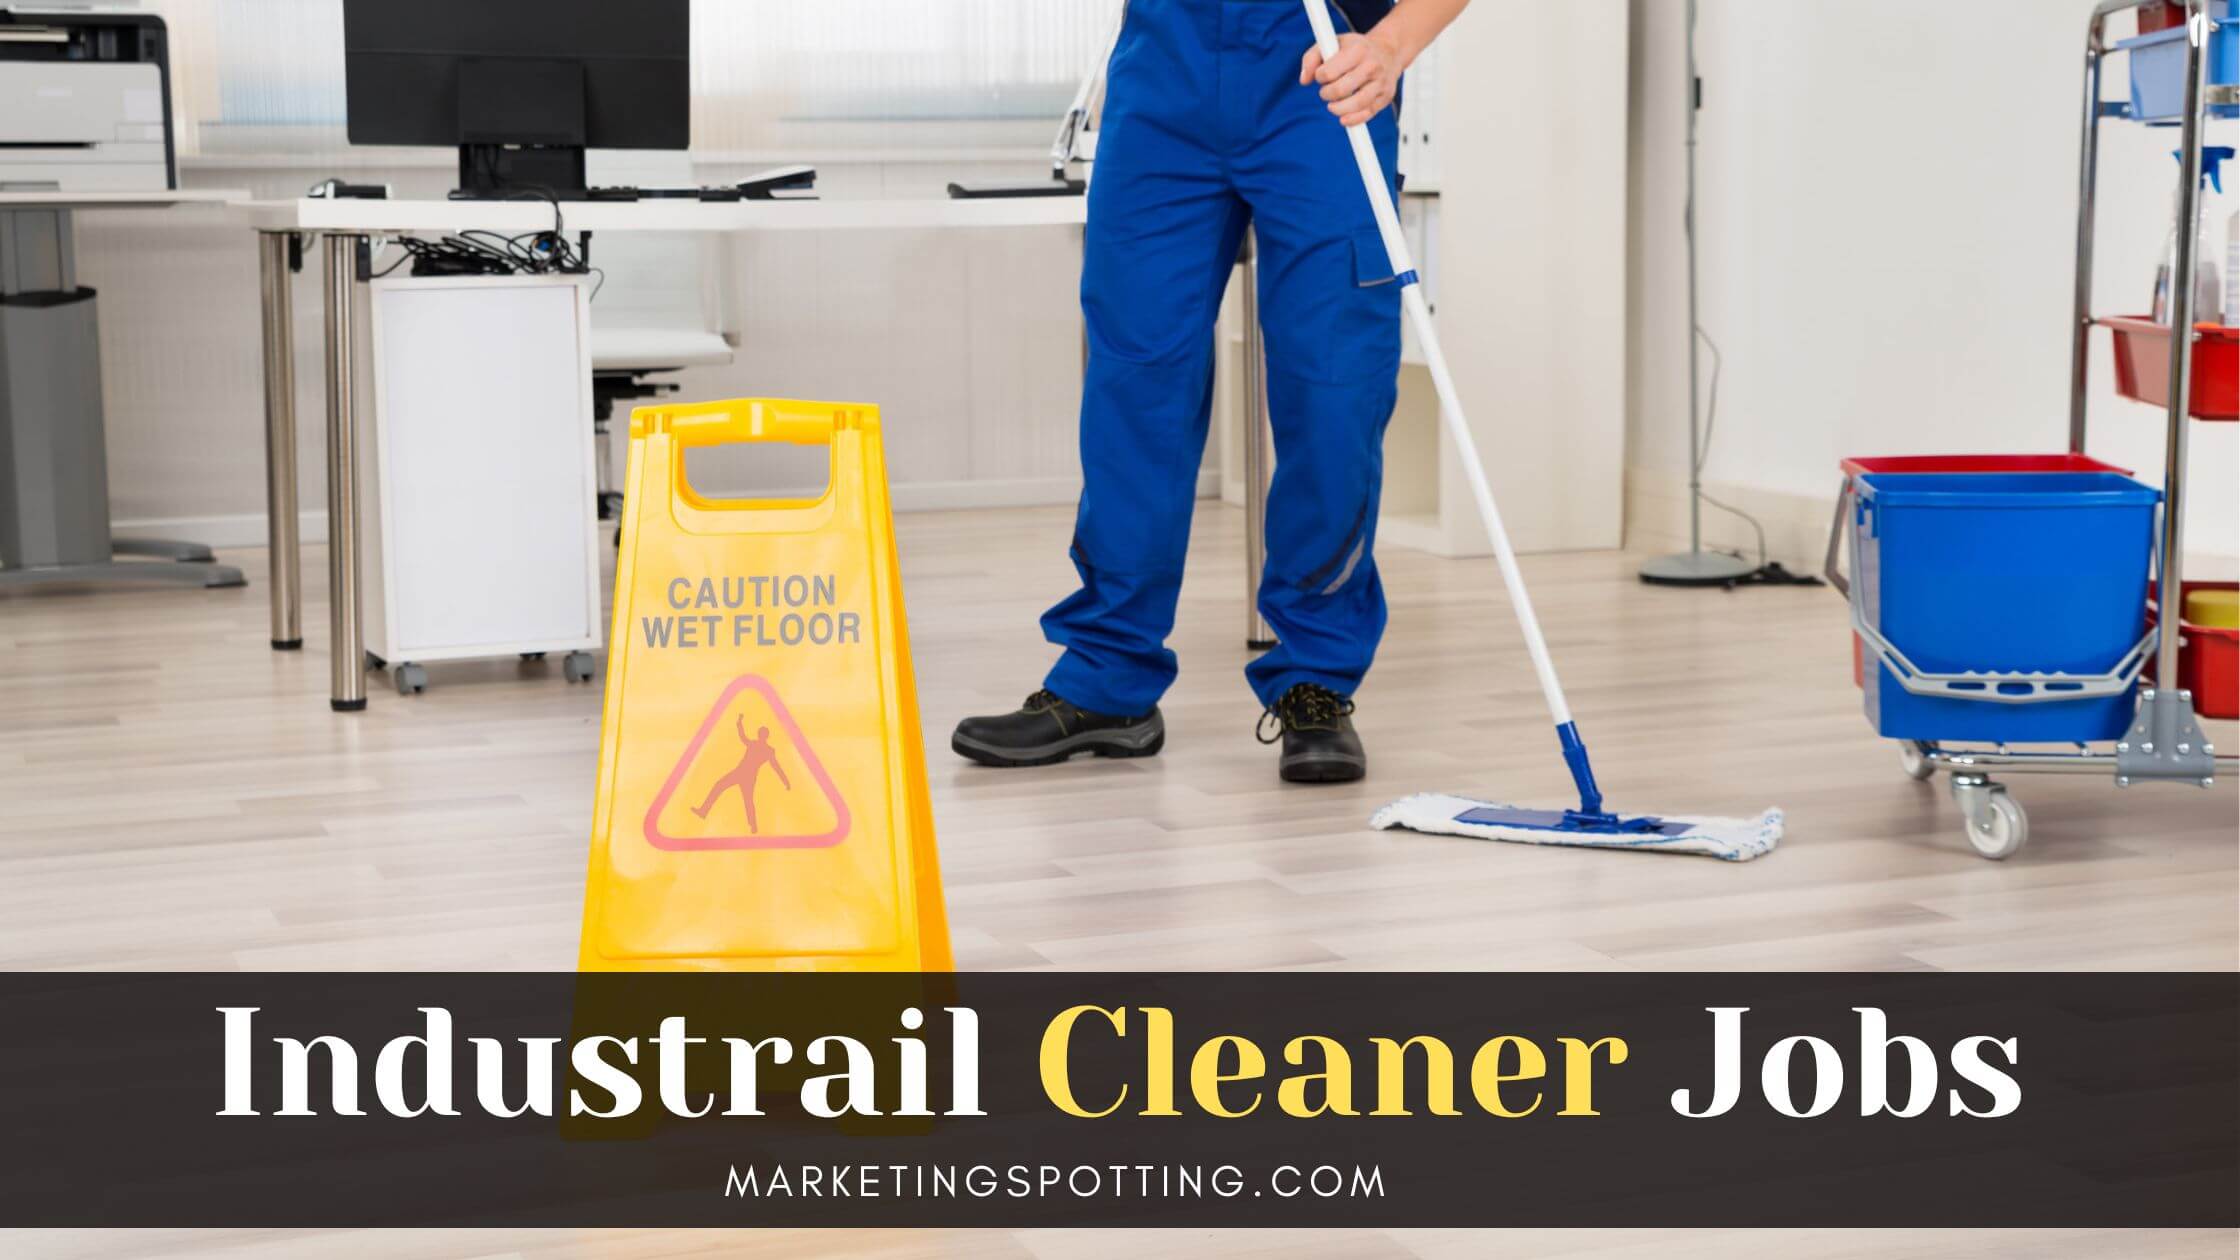 Industrial Cleaner Jobs in Canada